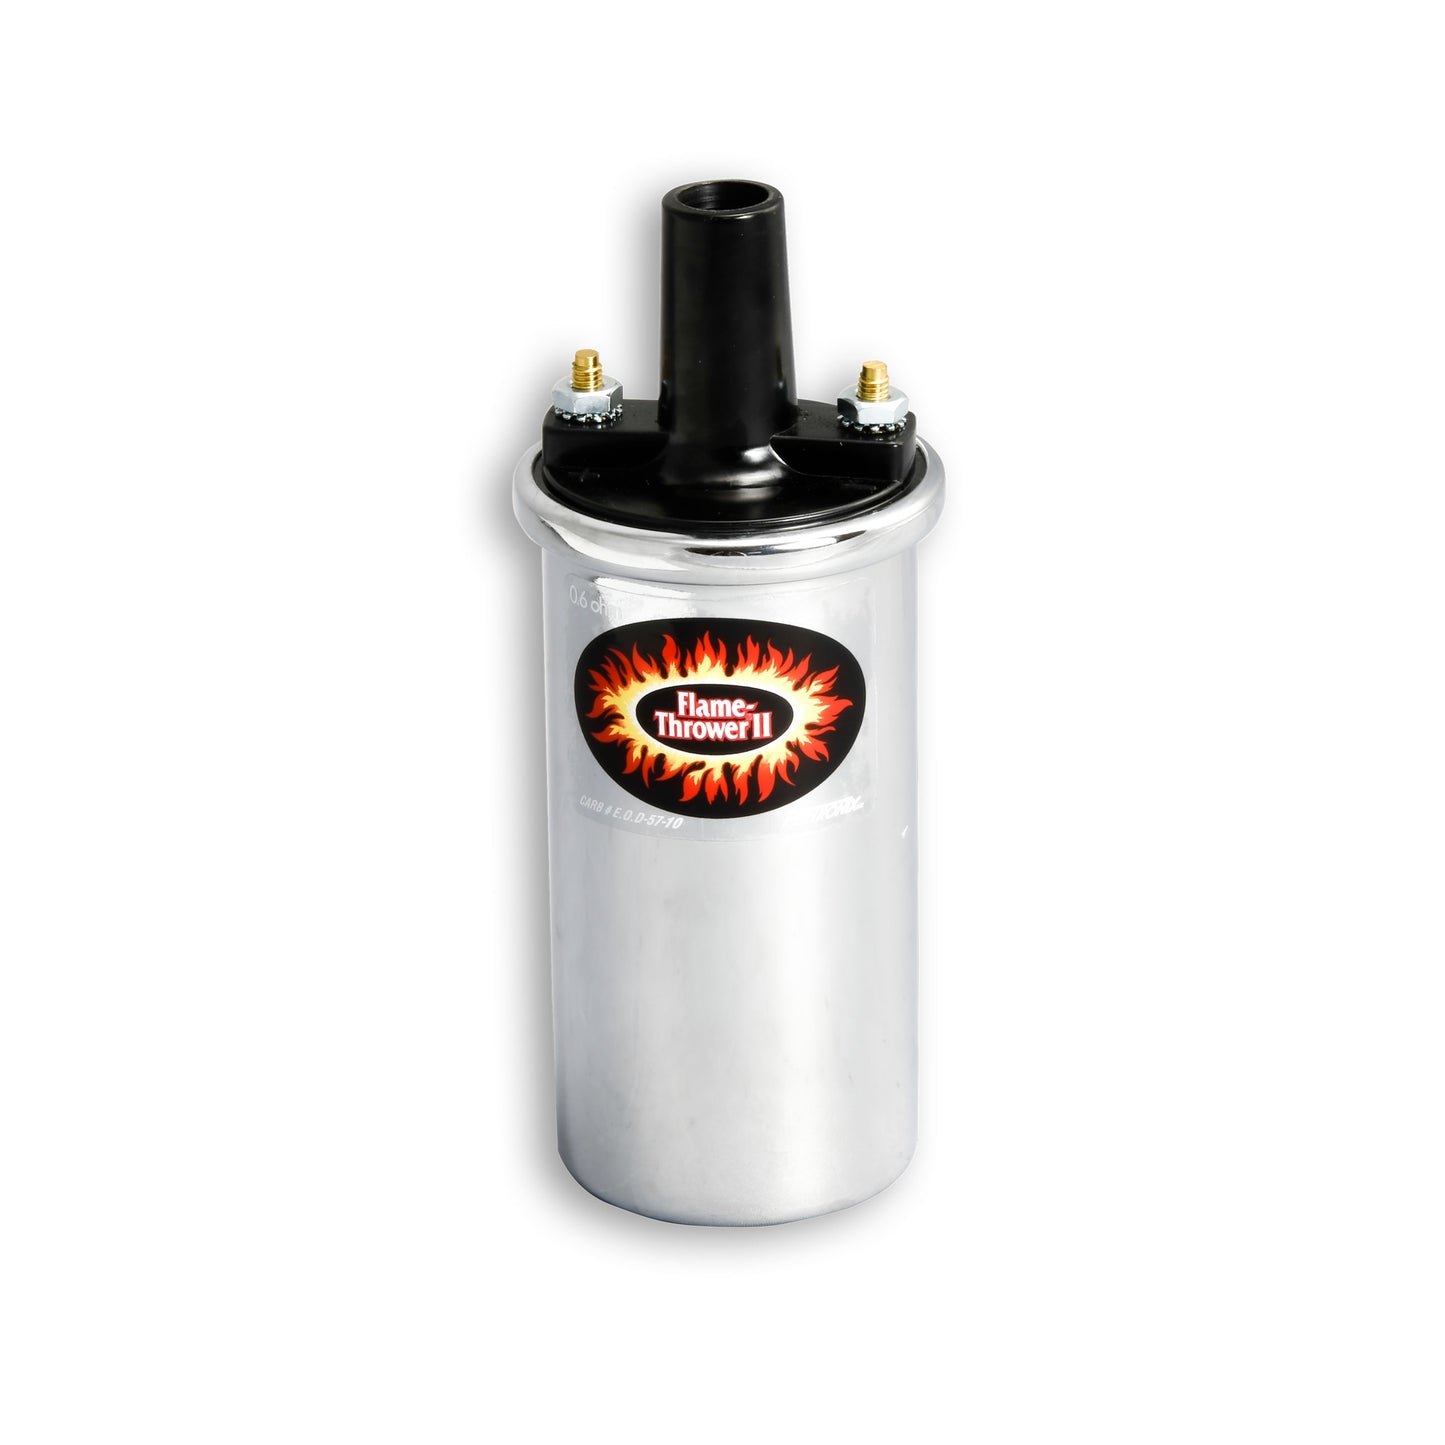 PerTronix 45001 Flame-Thrower II Coil 45,000 Volt 0.6 ohm Chrome